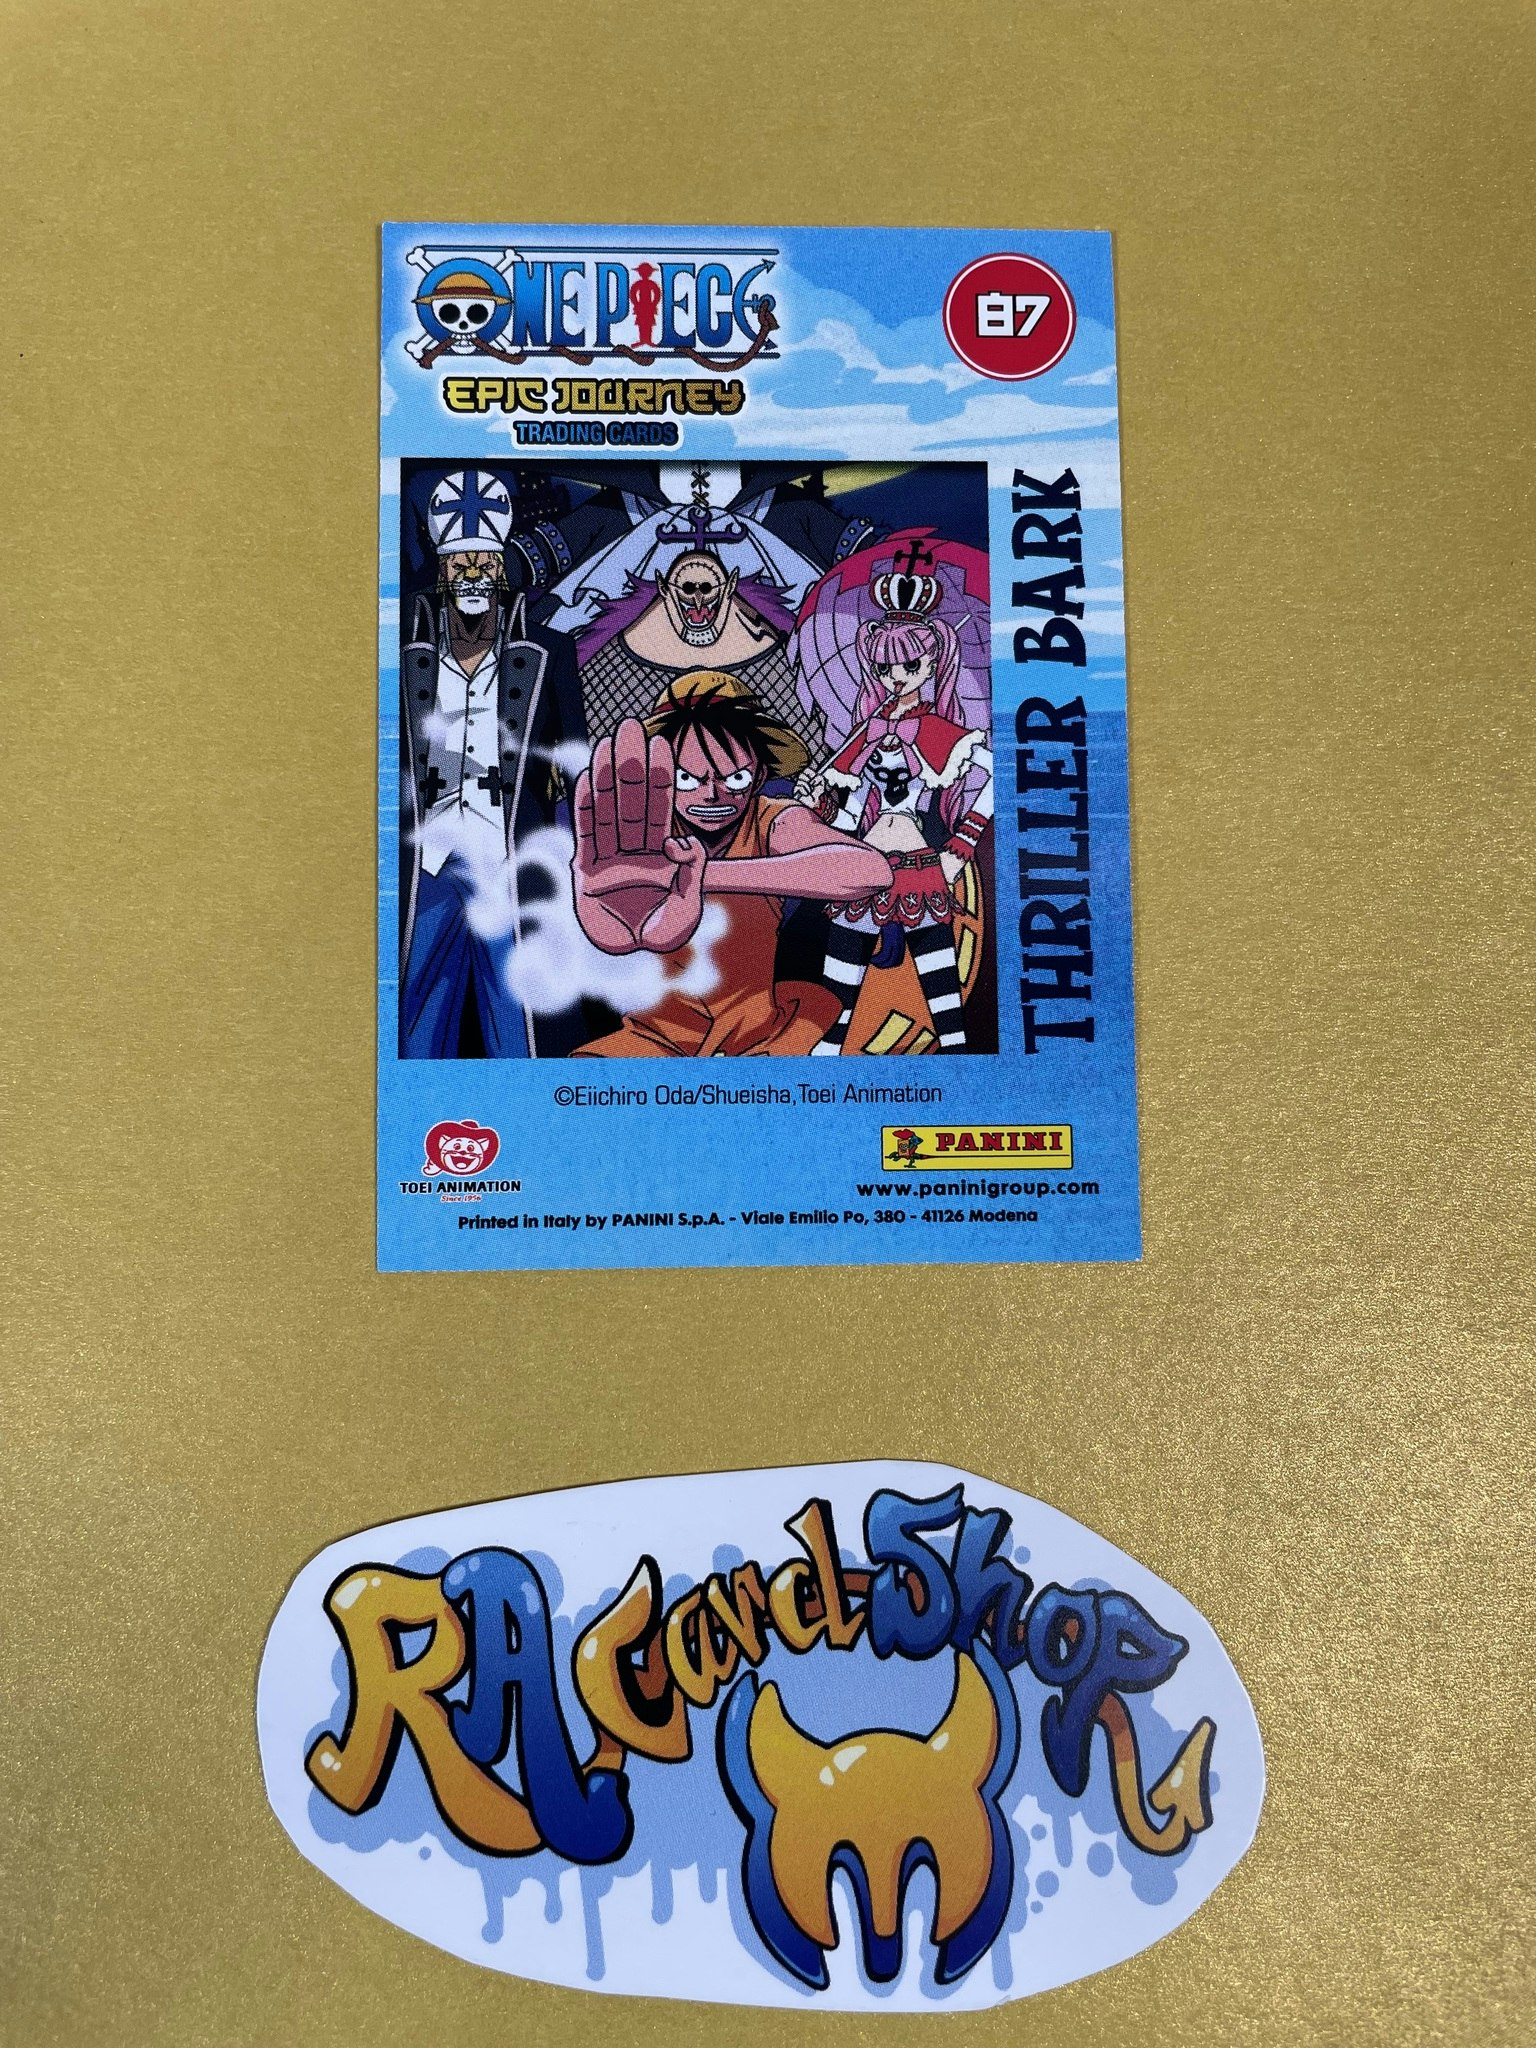 Triller Bark Epic Journey 87 Trading Cards Panini One Piece